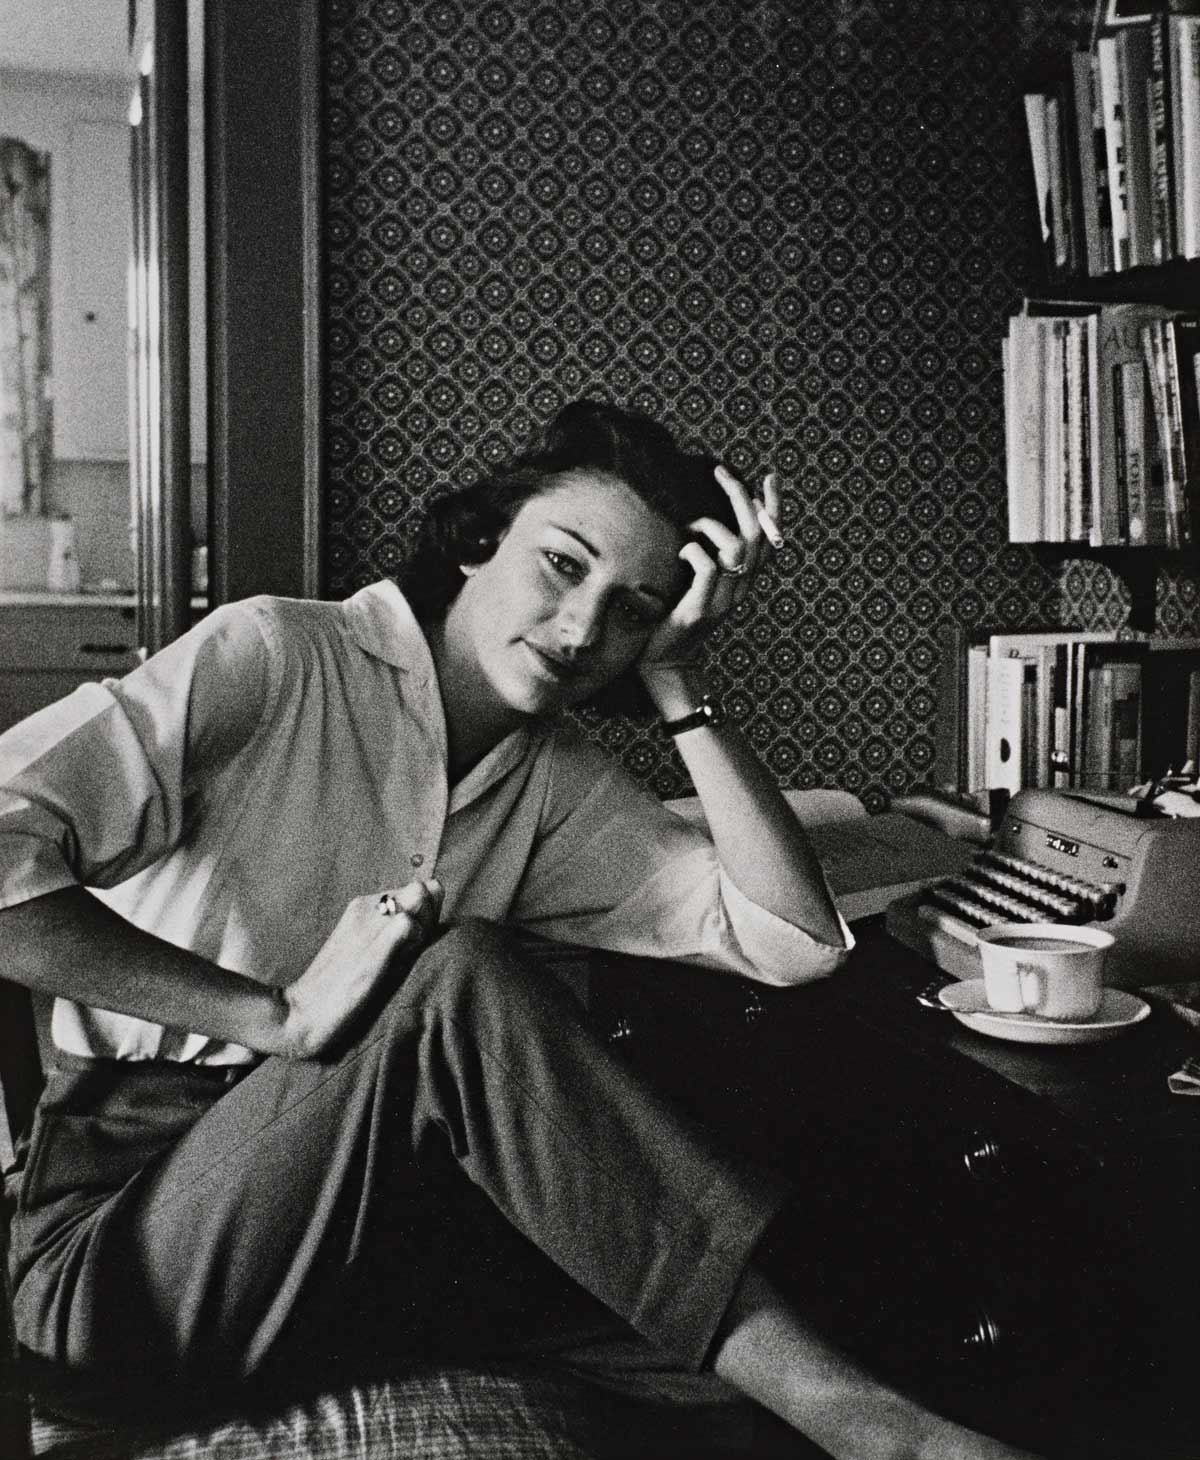 McKenna’s portrait of poet Anne Sexton, cigarette in hand, curled up in an office chair in front of a typewriter.